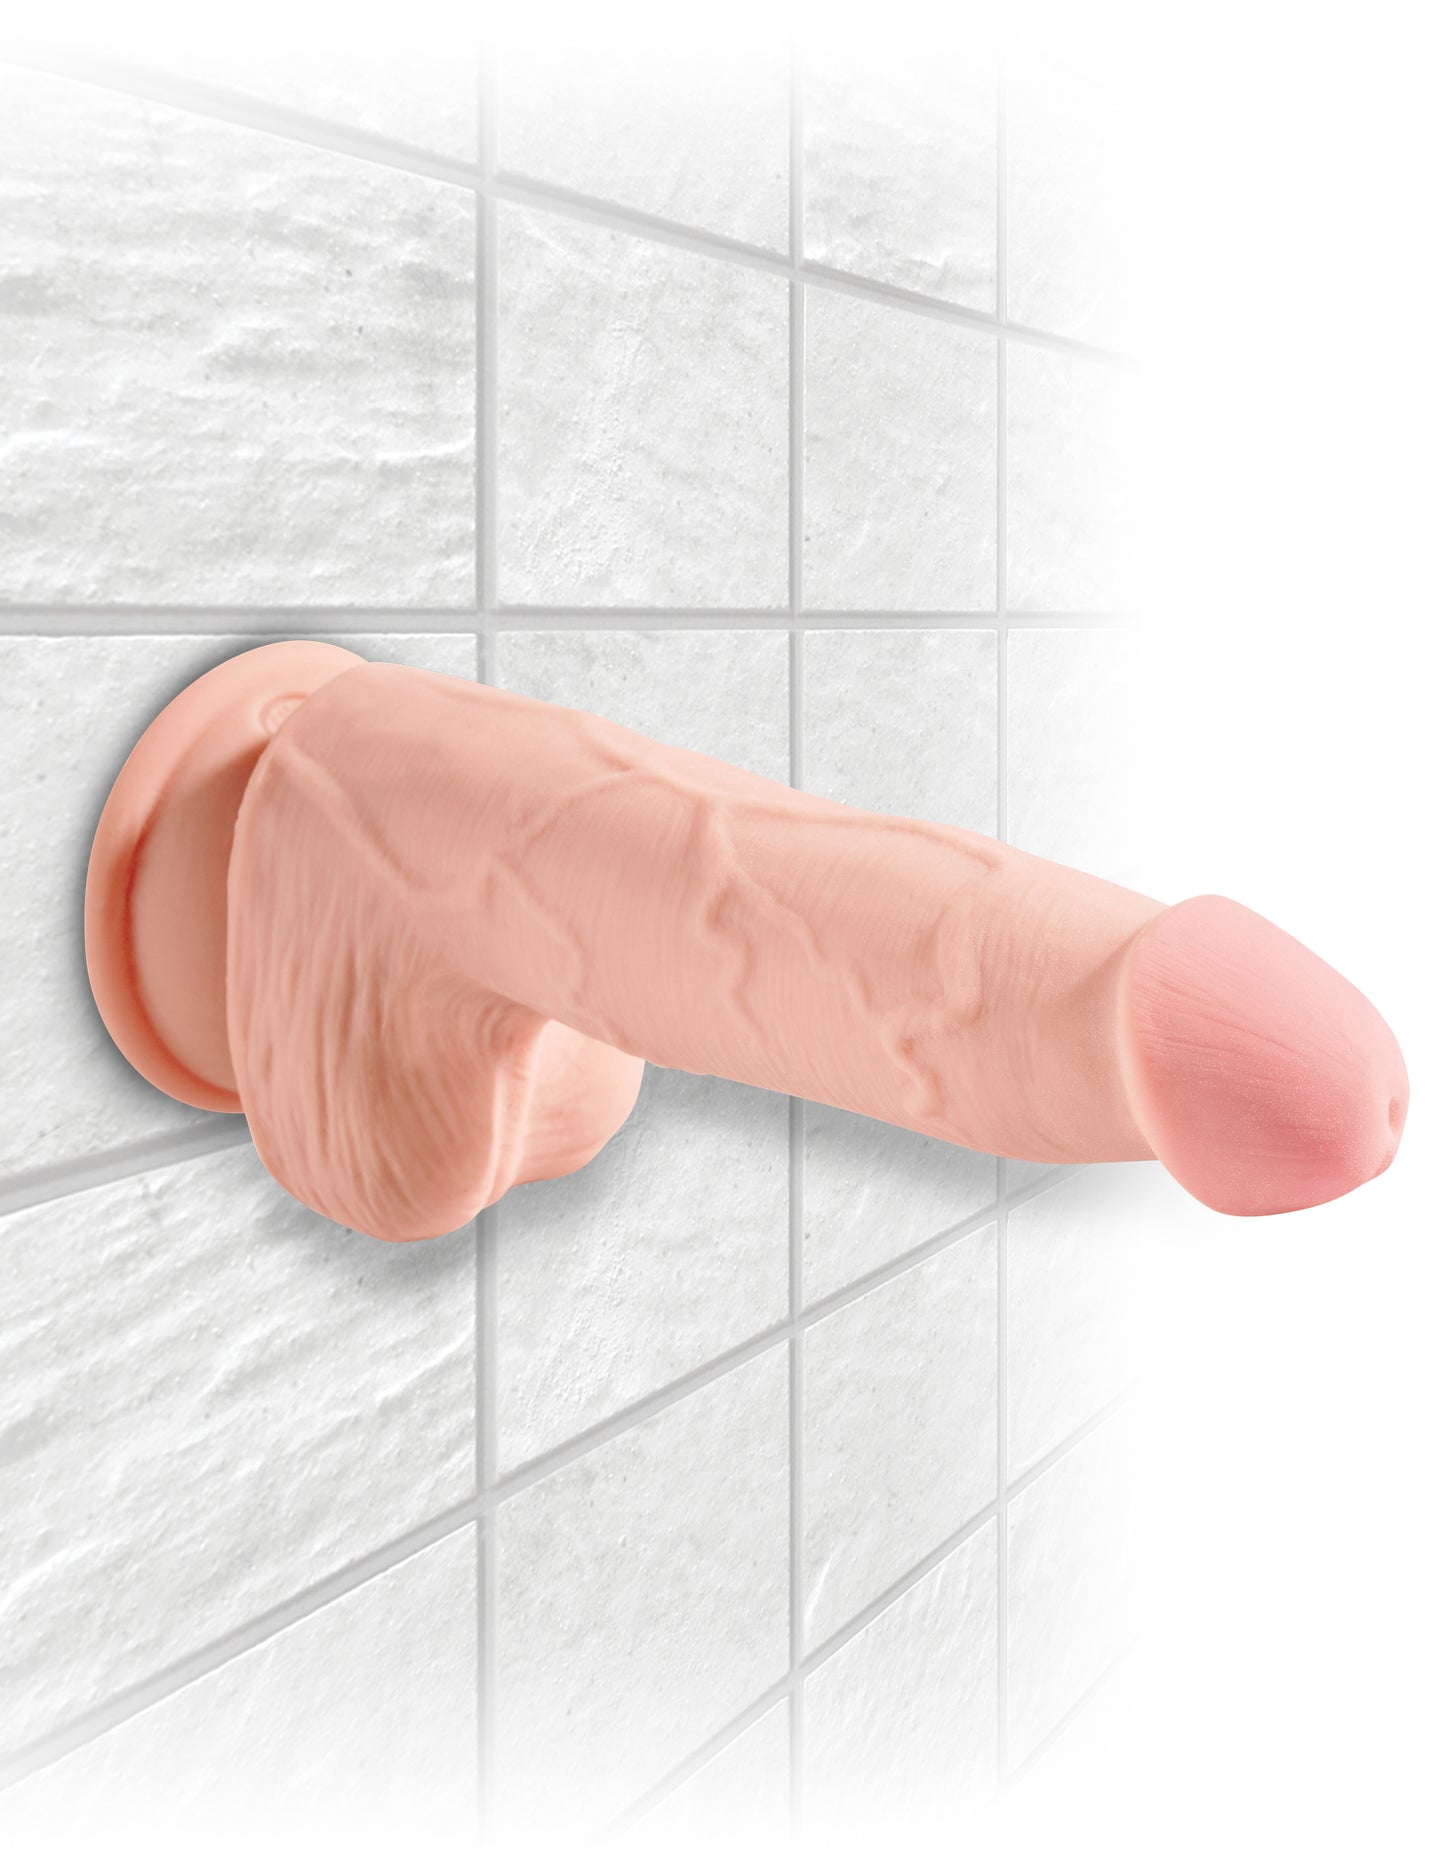 King Cock Plus - 3D Triple Density with balls 5 inch - Light